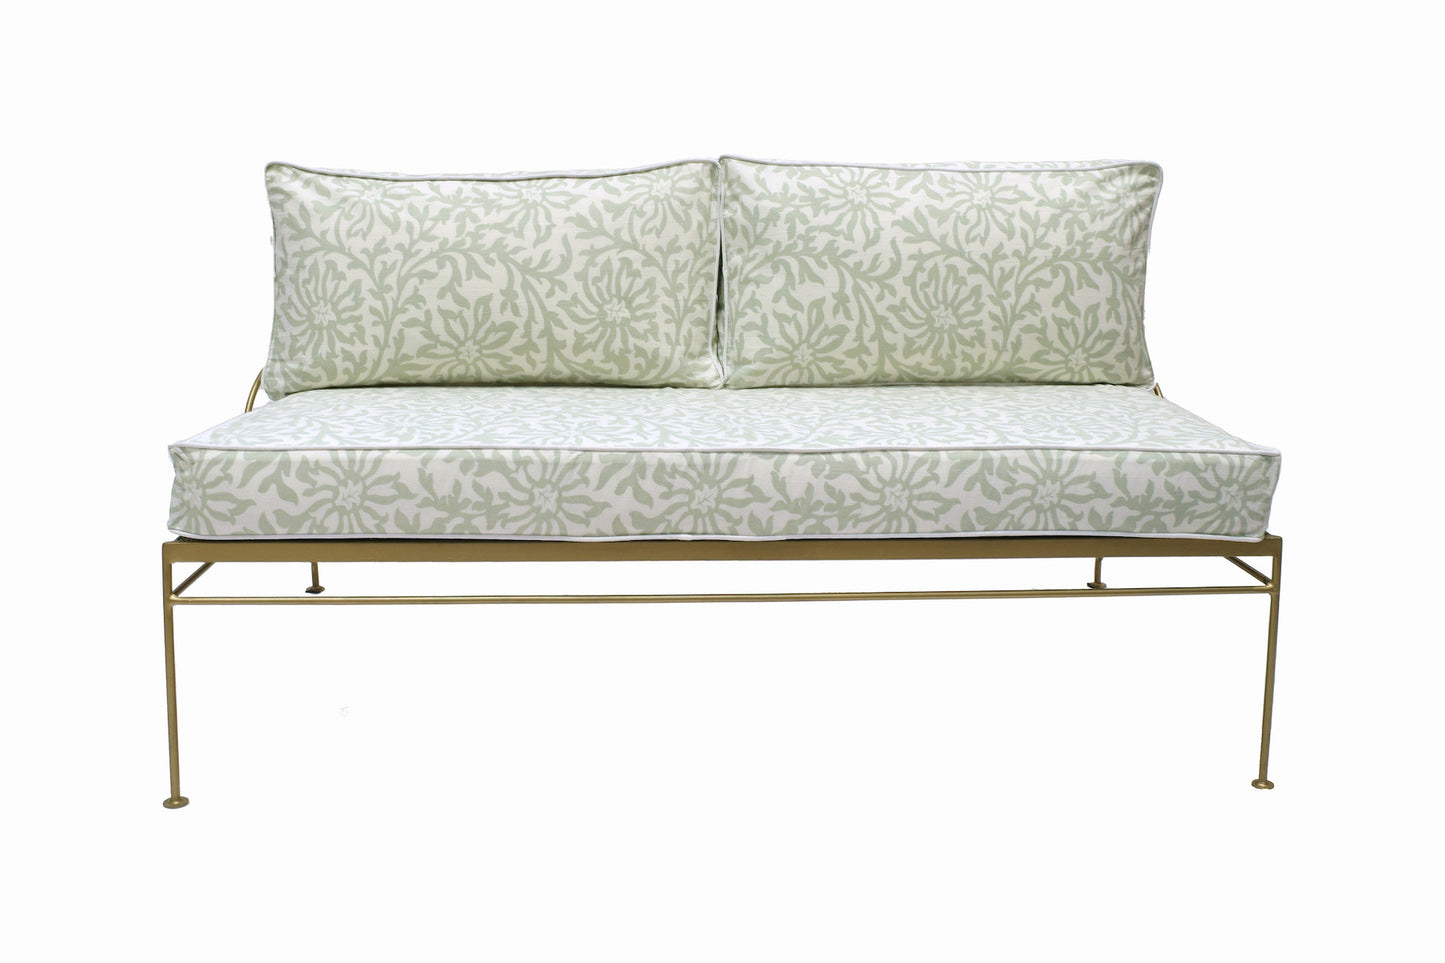 PALM SPRINGS GOLD METAL SOFA V&A Collaboration Clematis Cushions - Sage Green